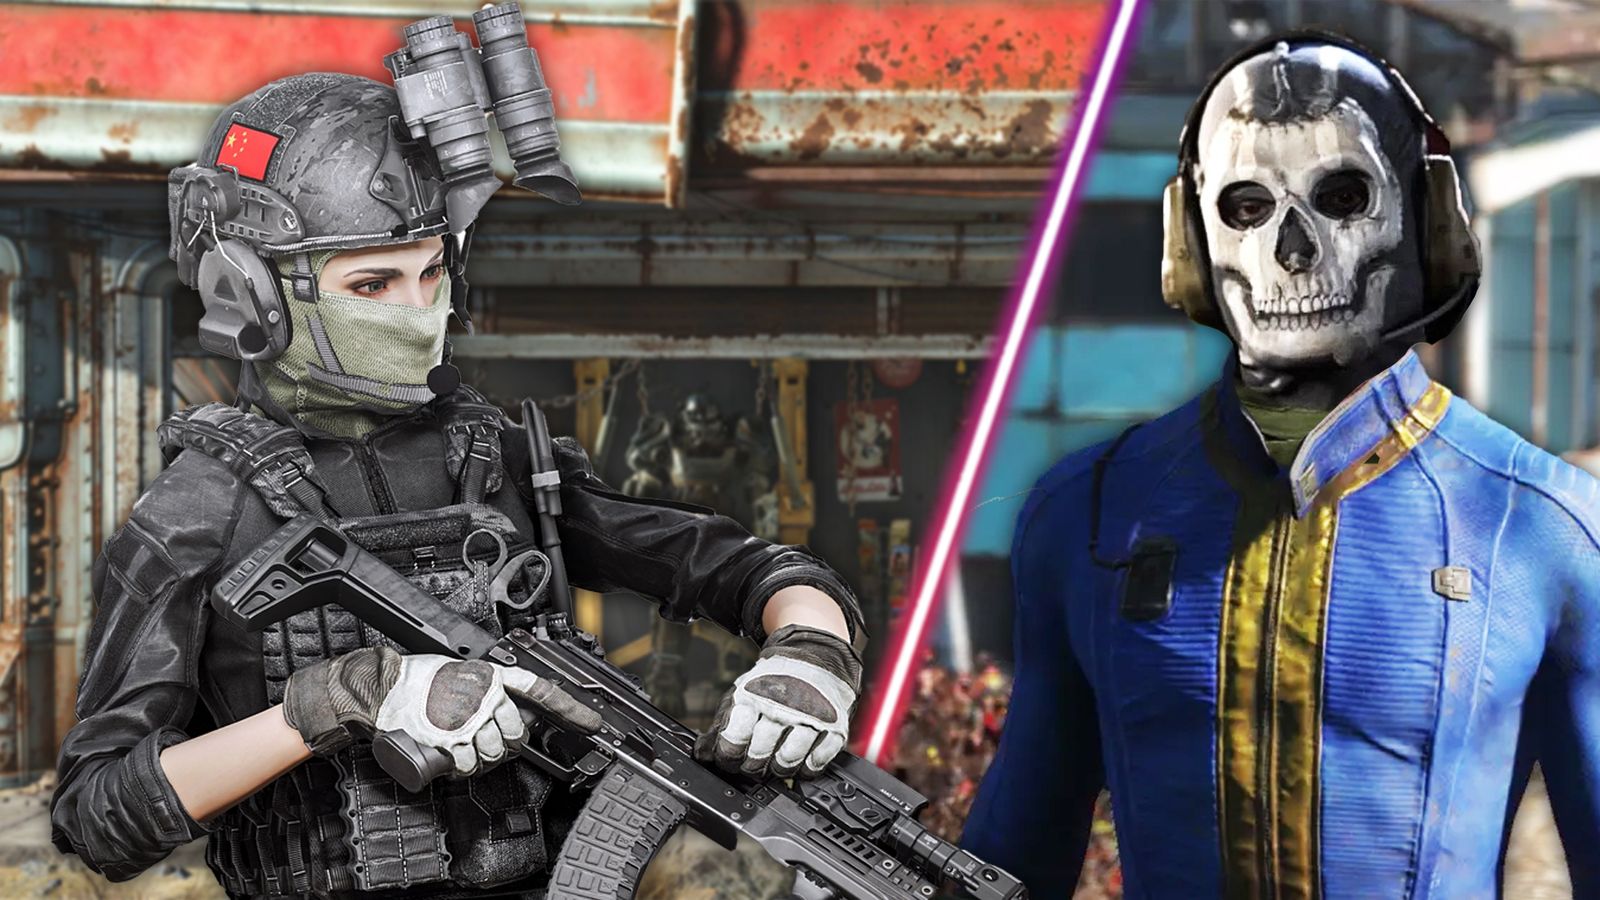 Some Call of Duty-style gear in Fallout 4.